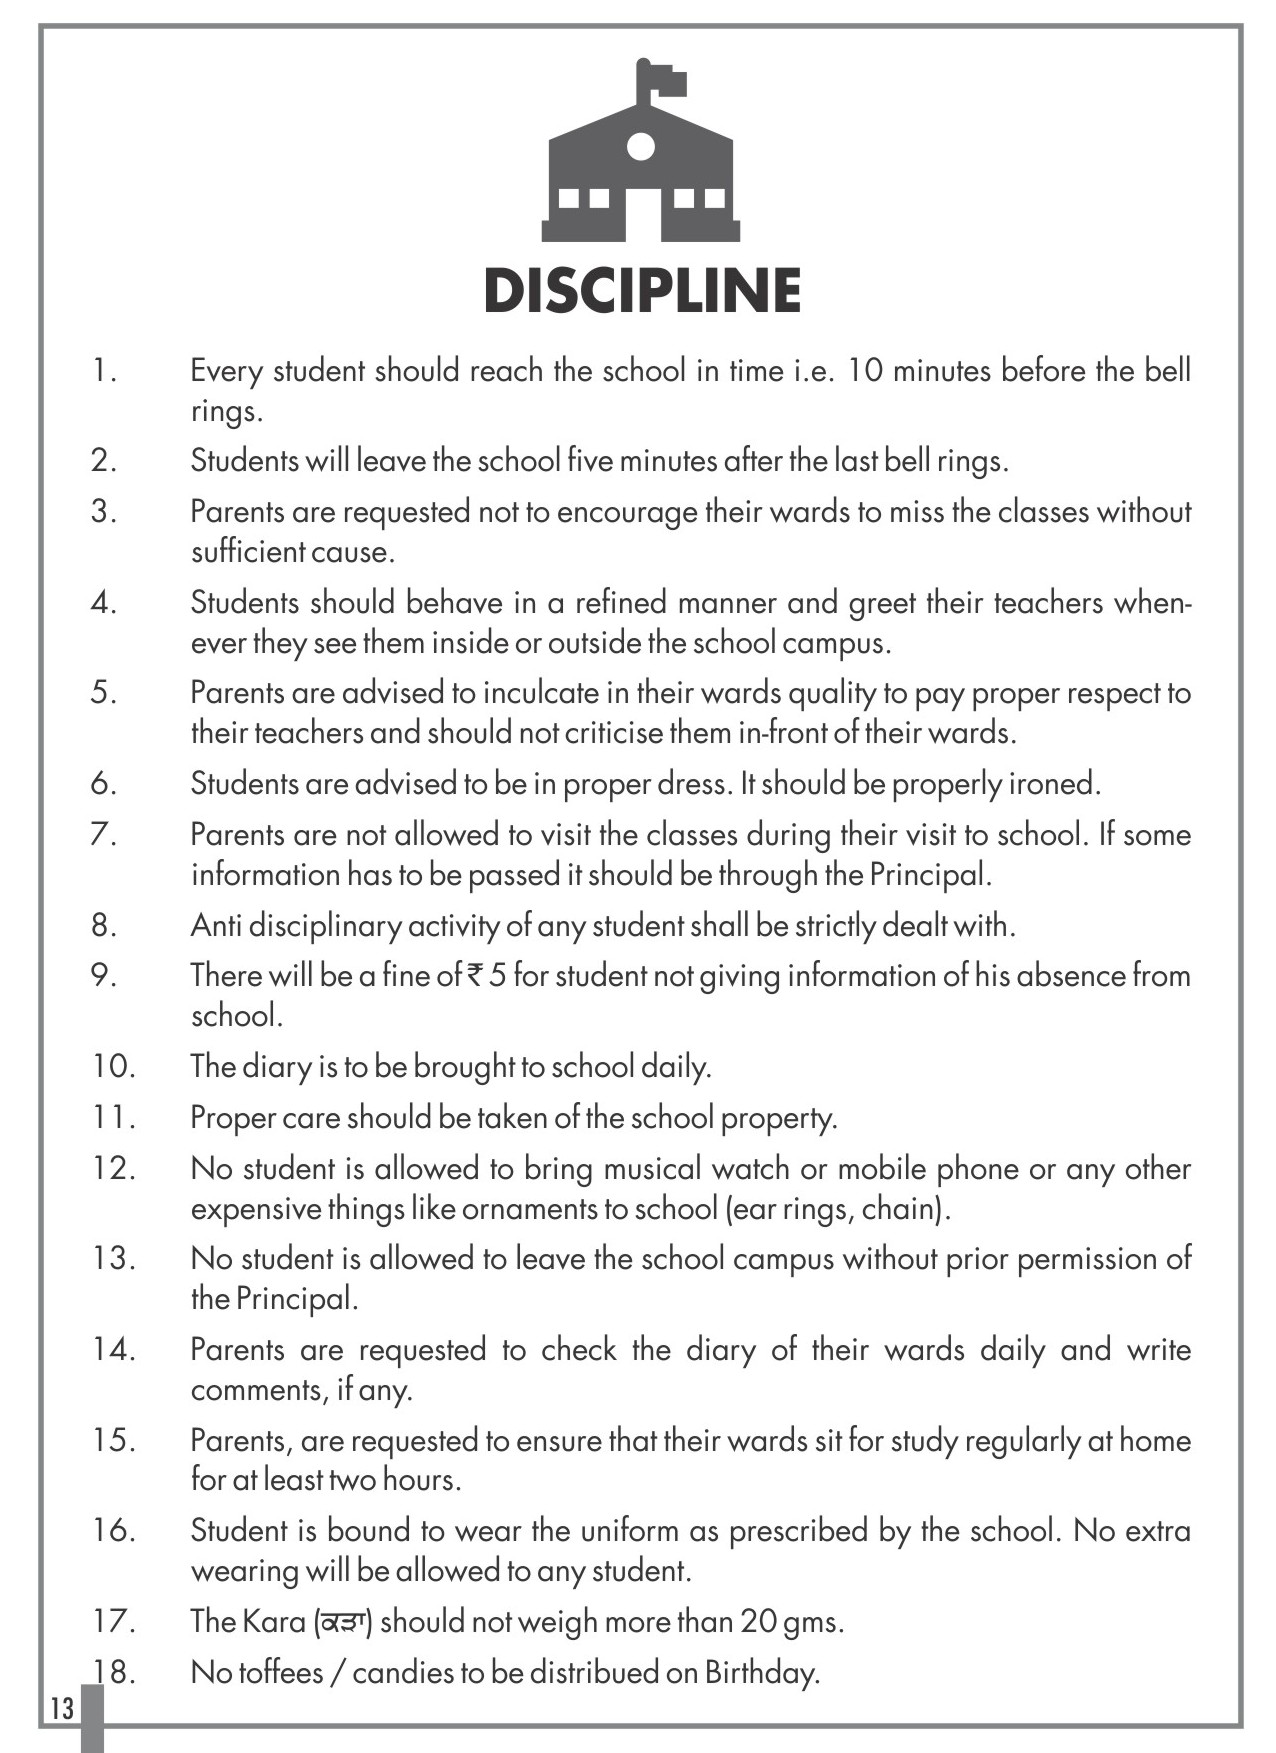 school rules and regulations